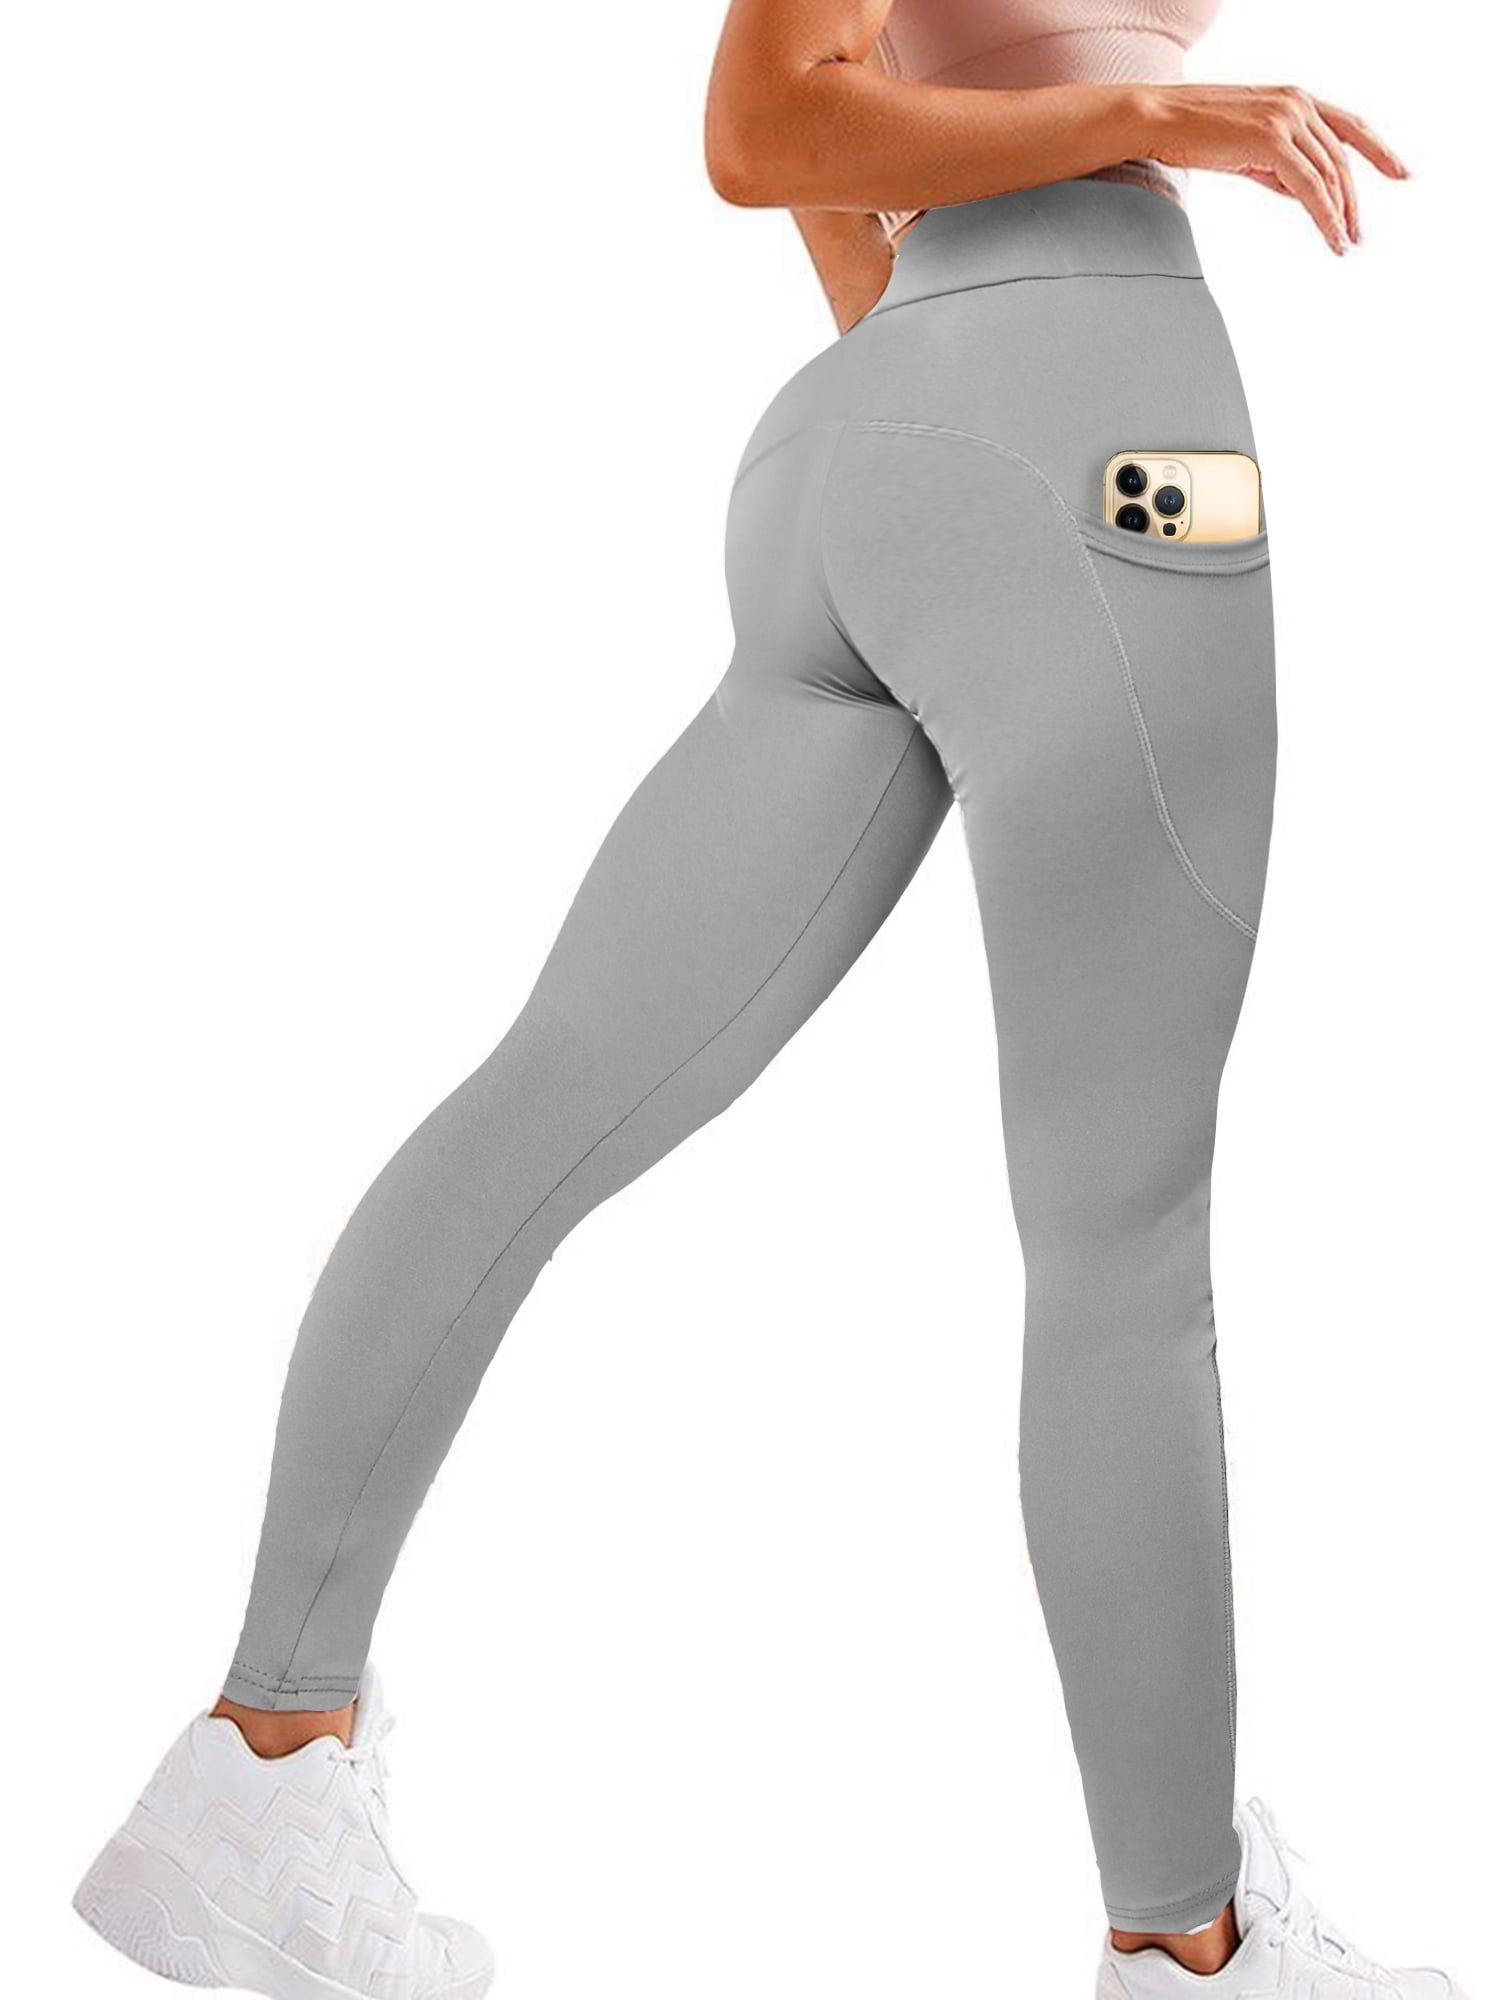 Women Sports Yoga Leggings Workout Running Gym Fitness Stretch Pants With Pocket 